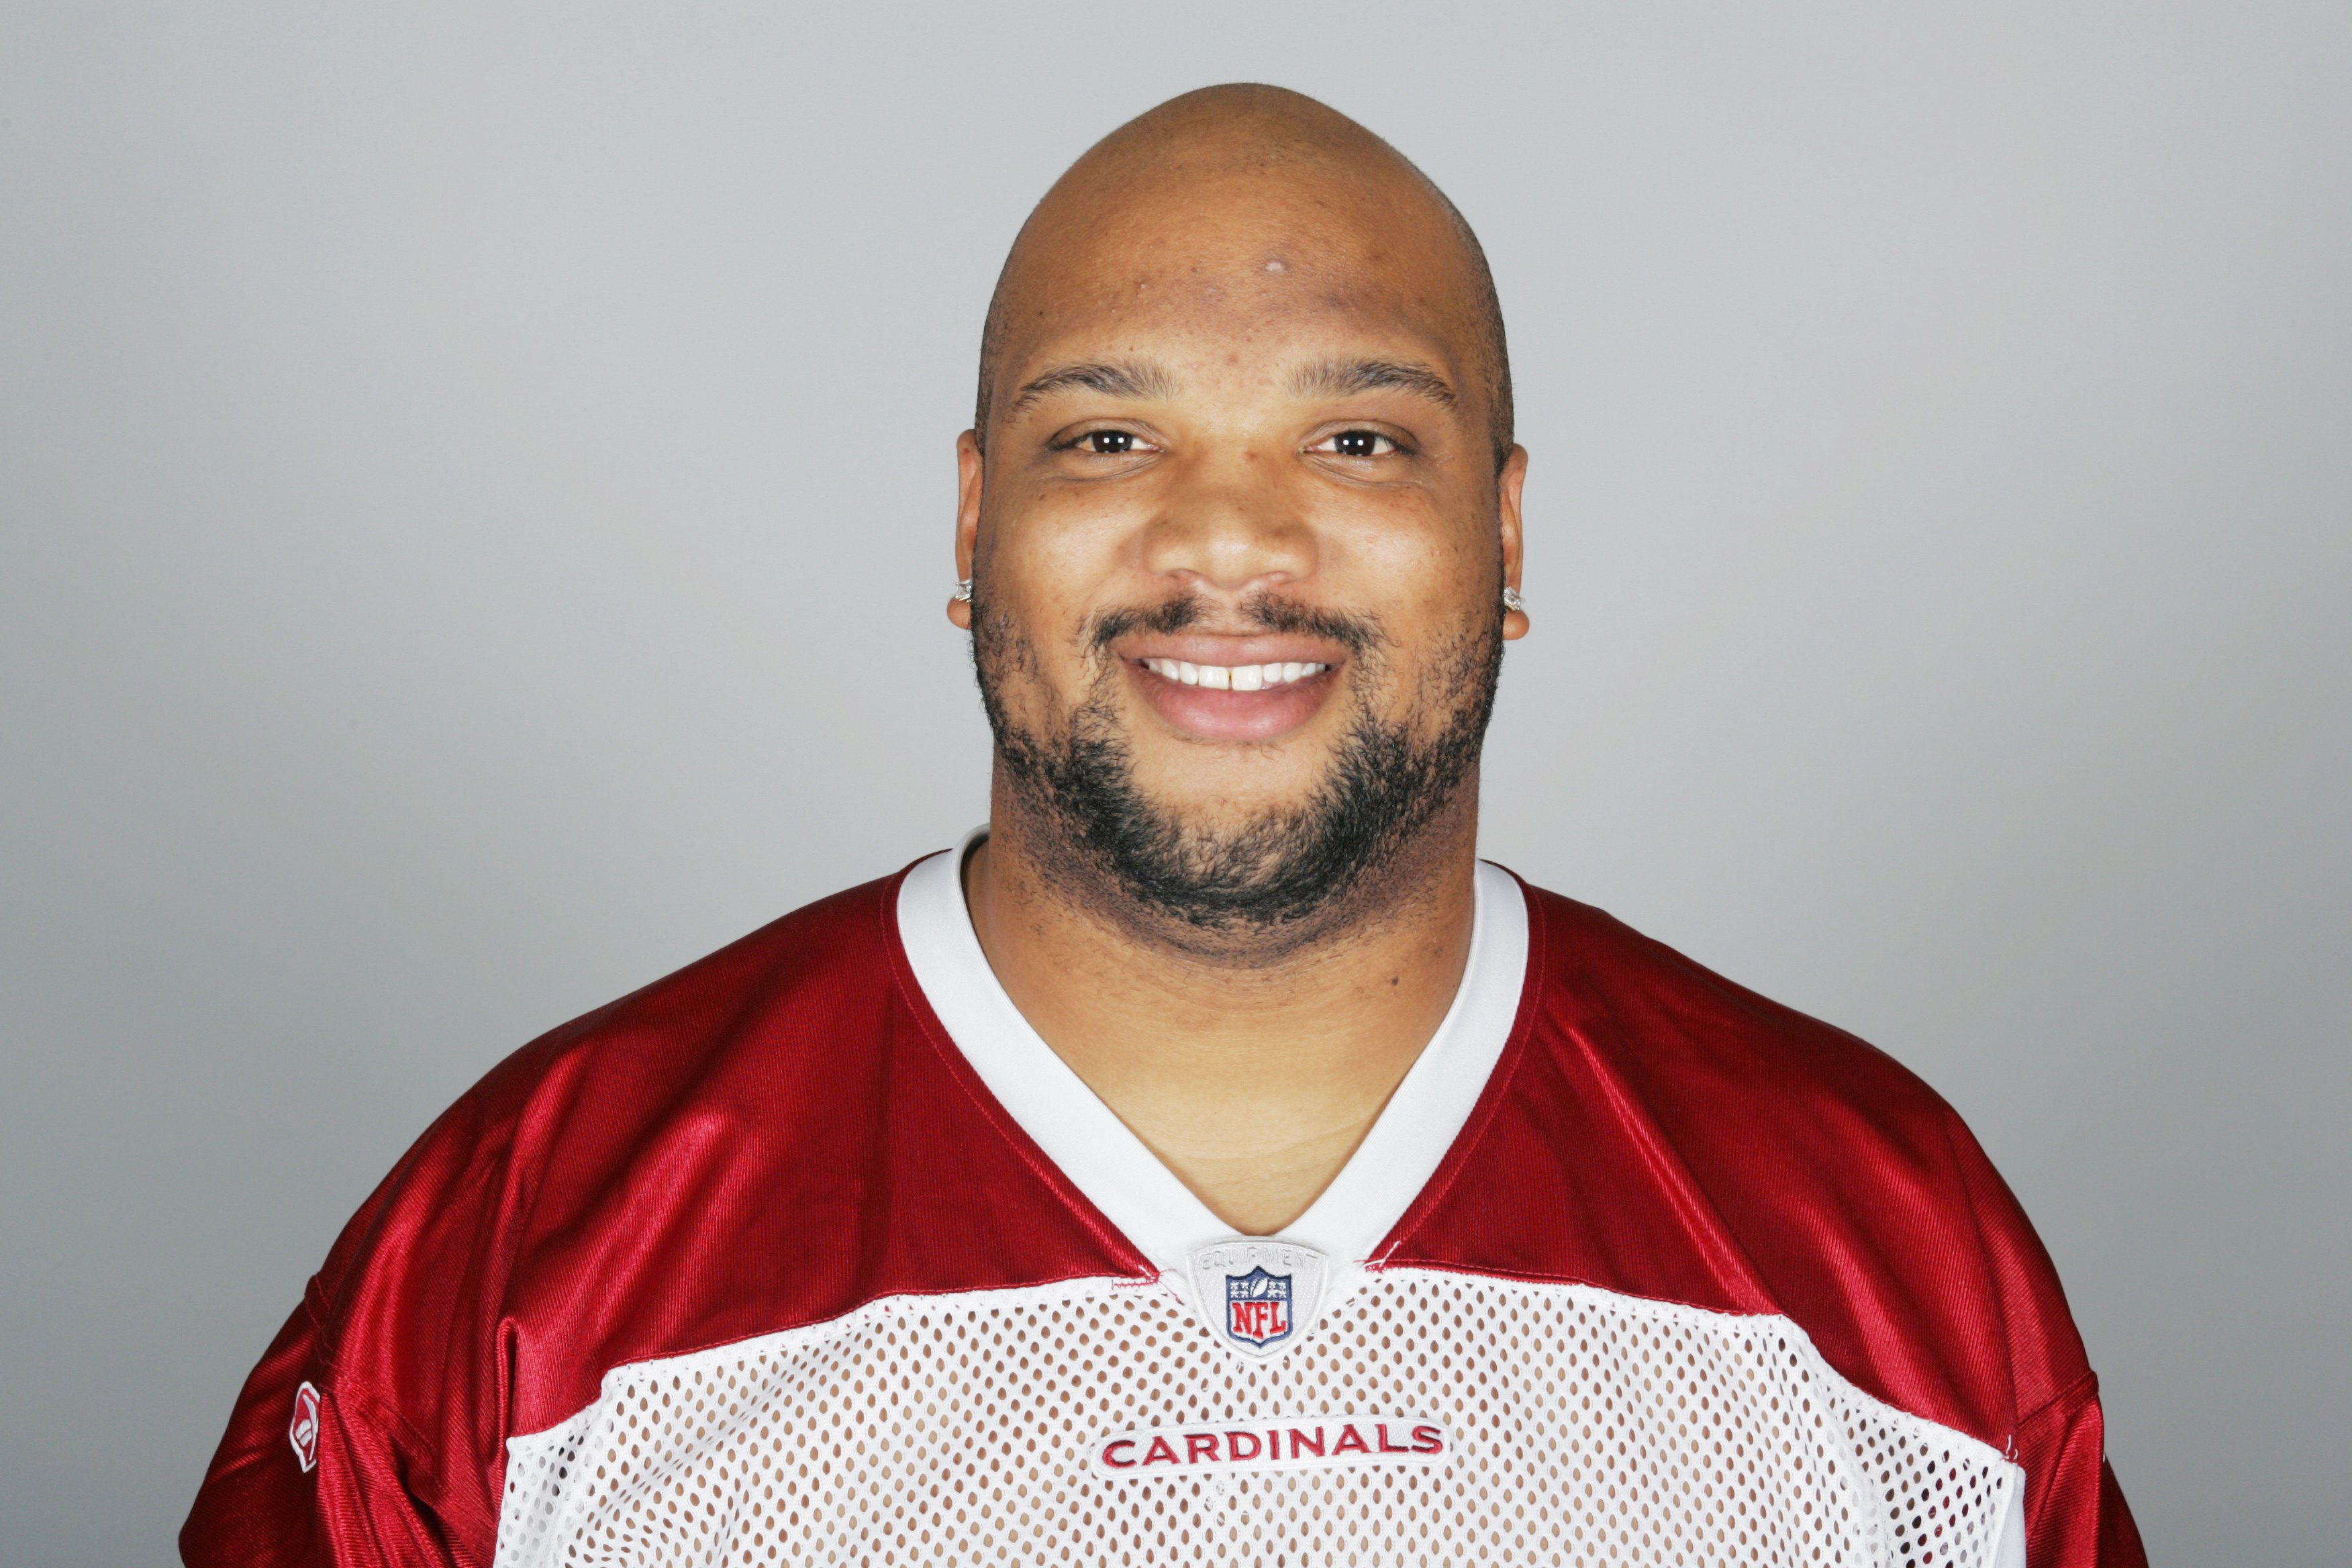 GLENDALE, AZ - 2009:  Alan Branch of the Arizona Cardinals poses for his 2009 NFL headshot at photo day in Glendale, Arizona.  (Photo by NFL Photos)